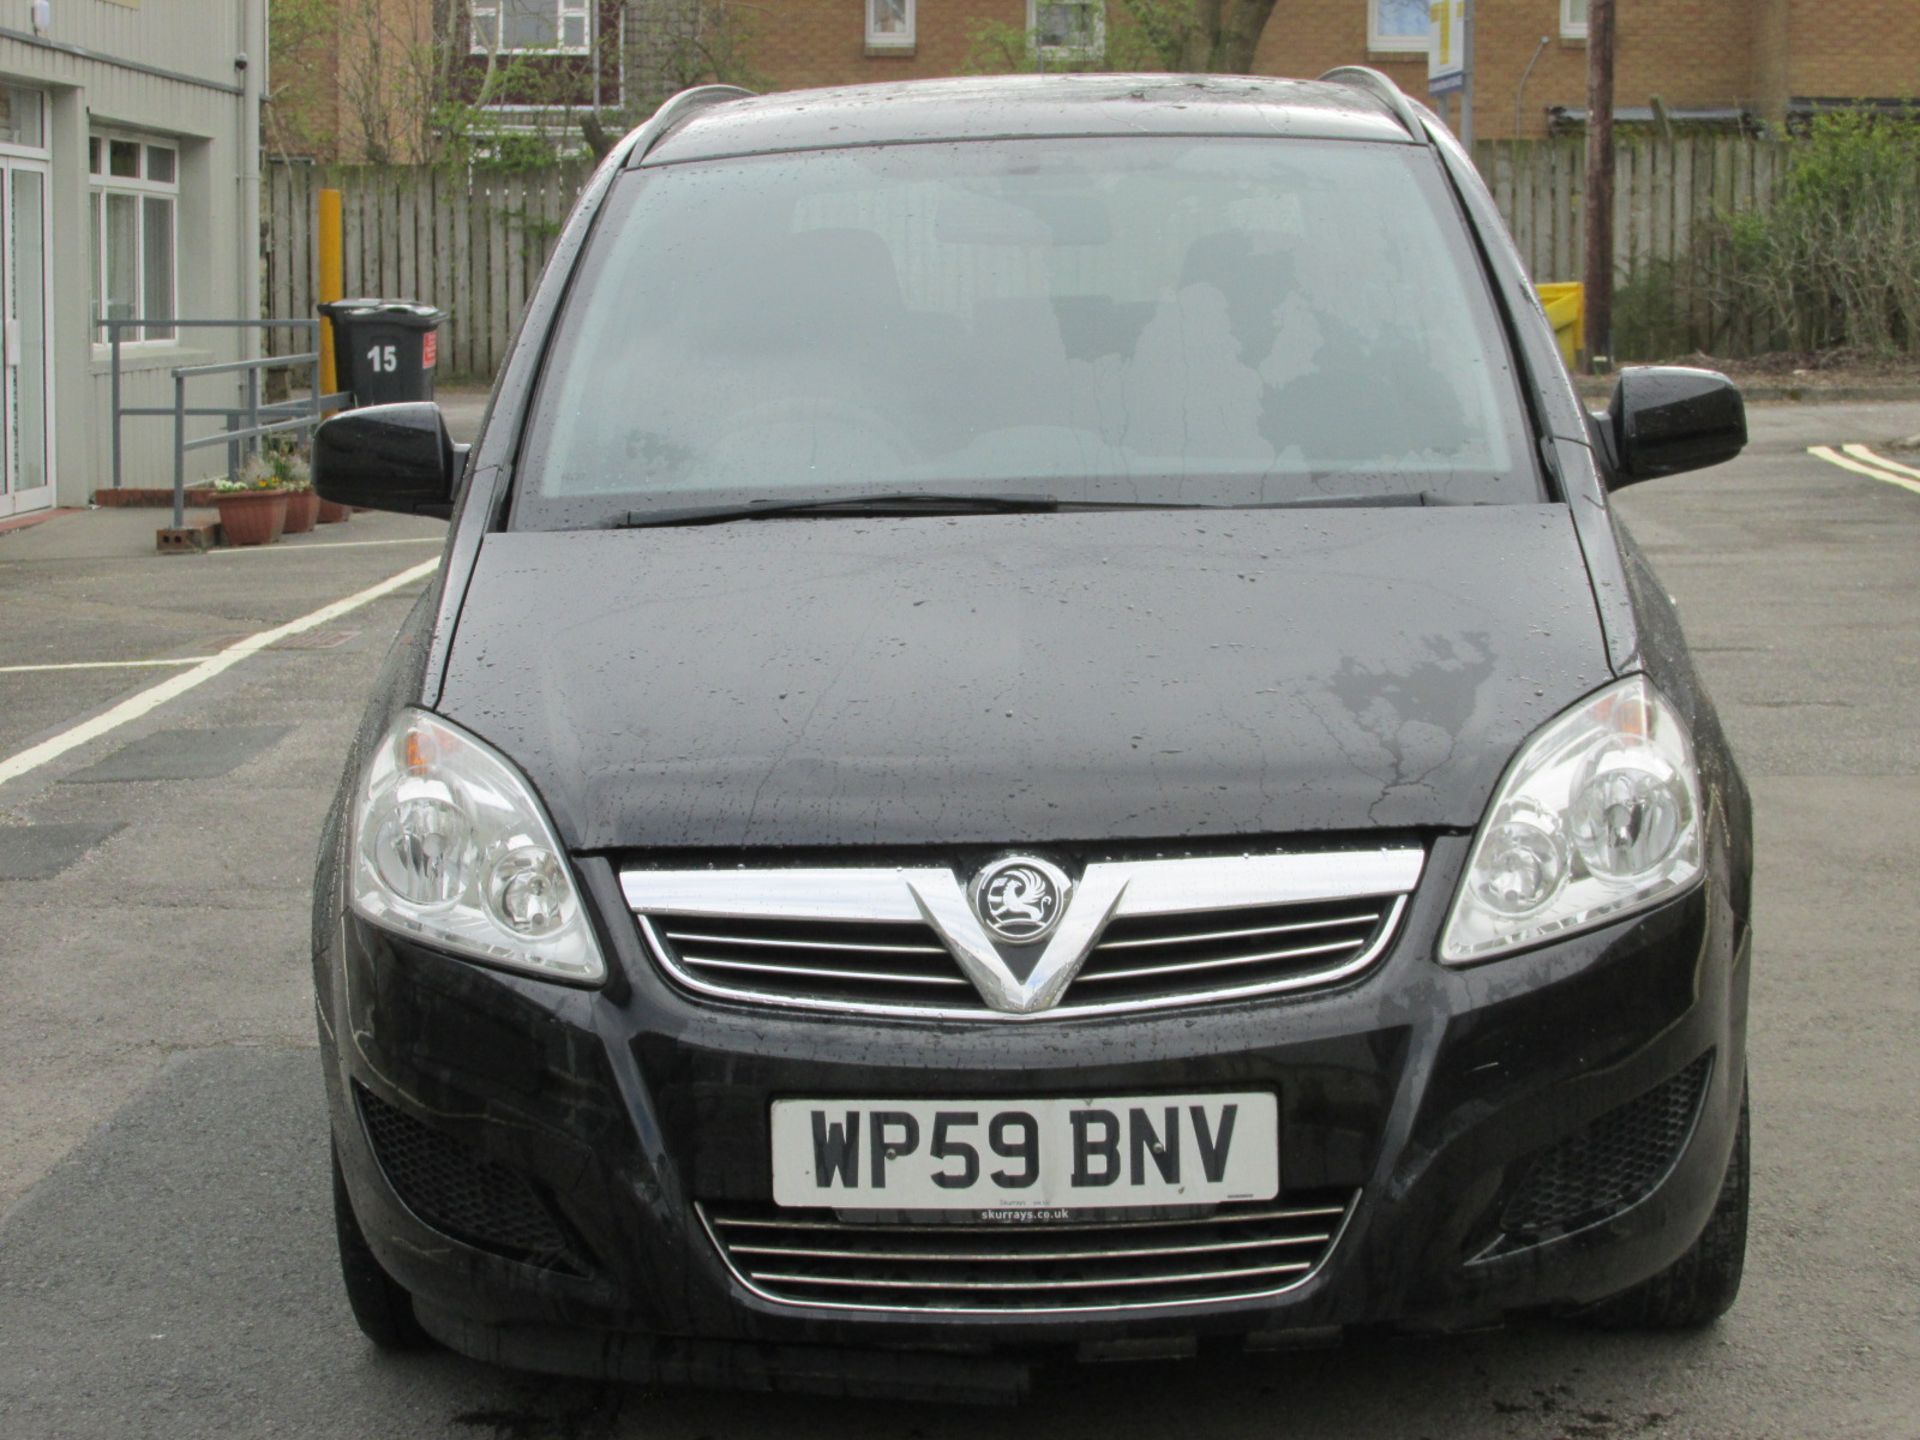 2009 Vauxhall Zafira 1.6i 16v Exclusive - 7 Seater MPV - Low Mileage - Image 4 of 14